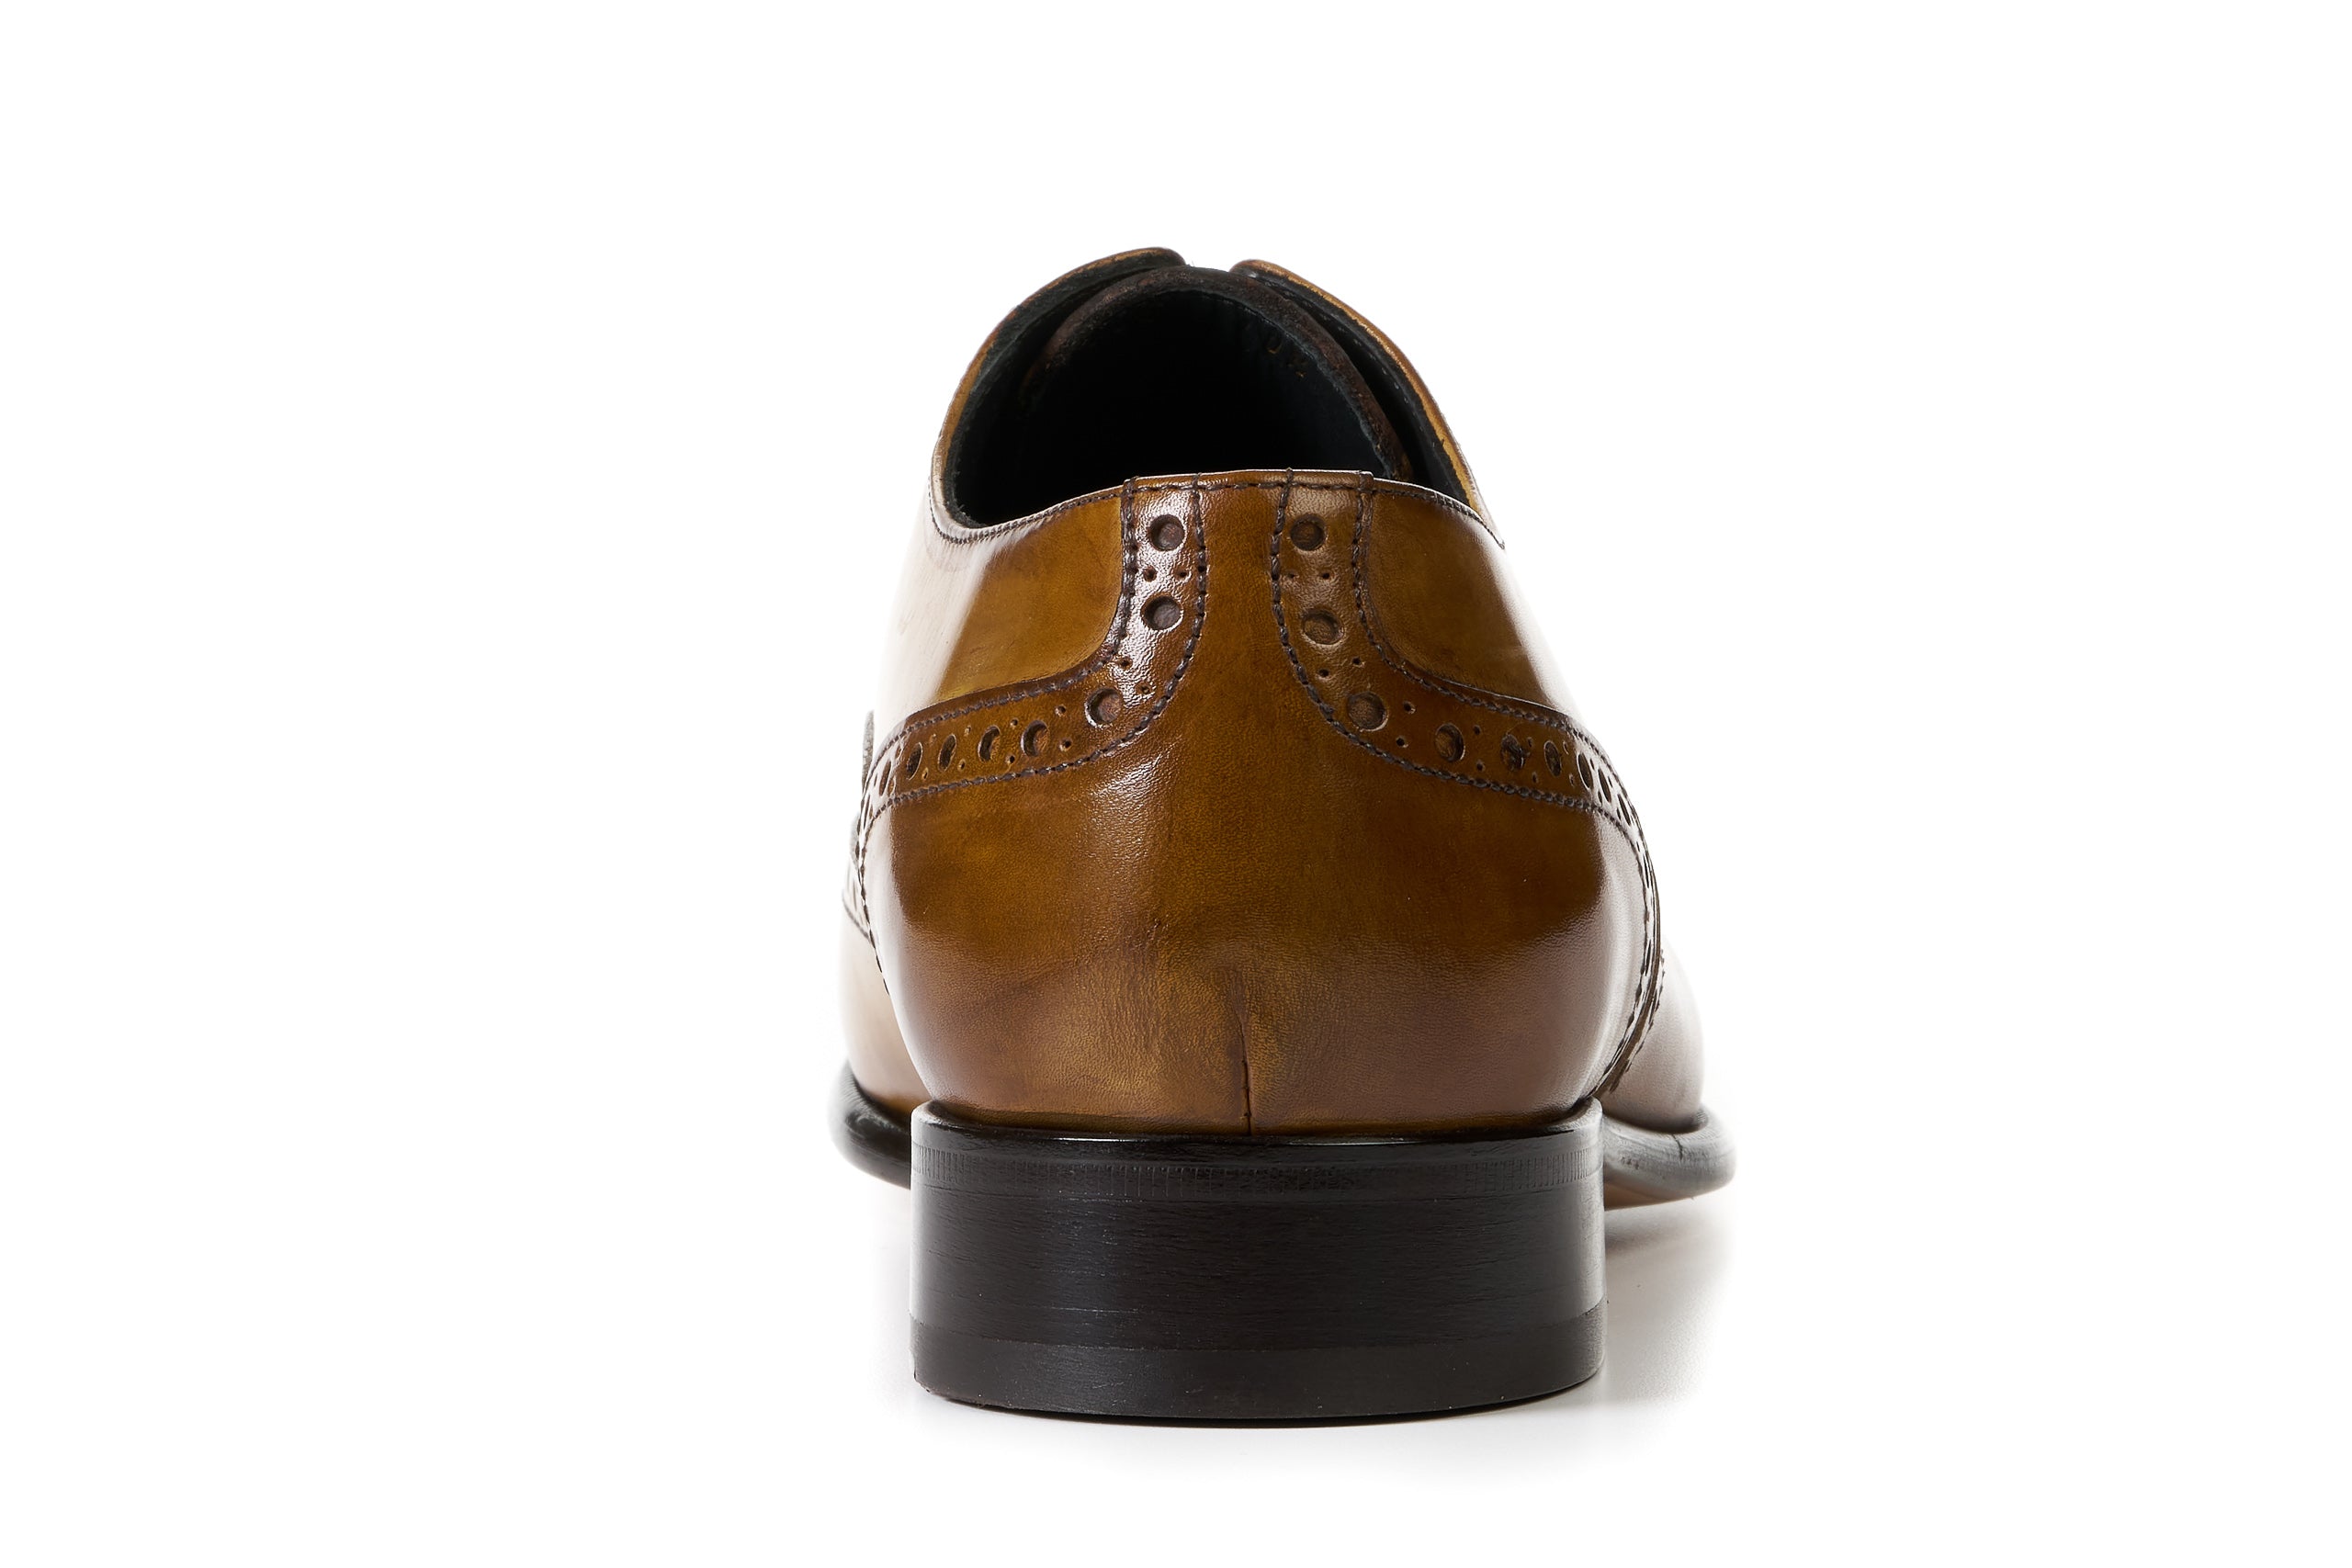 The West II Wingtip Oxford - Tobacco